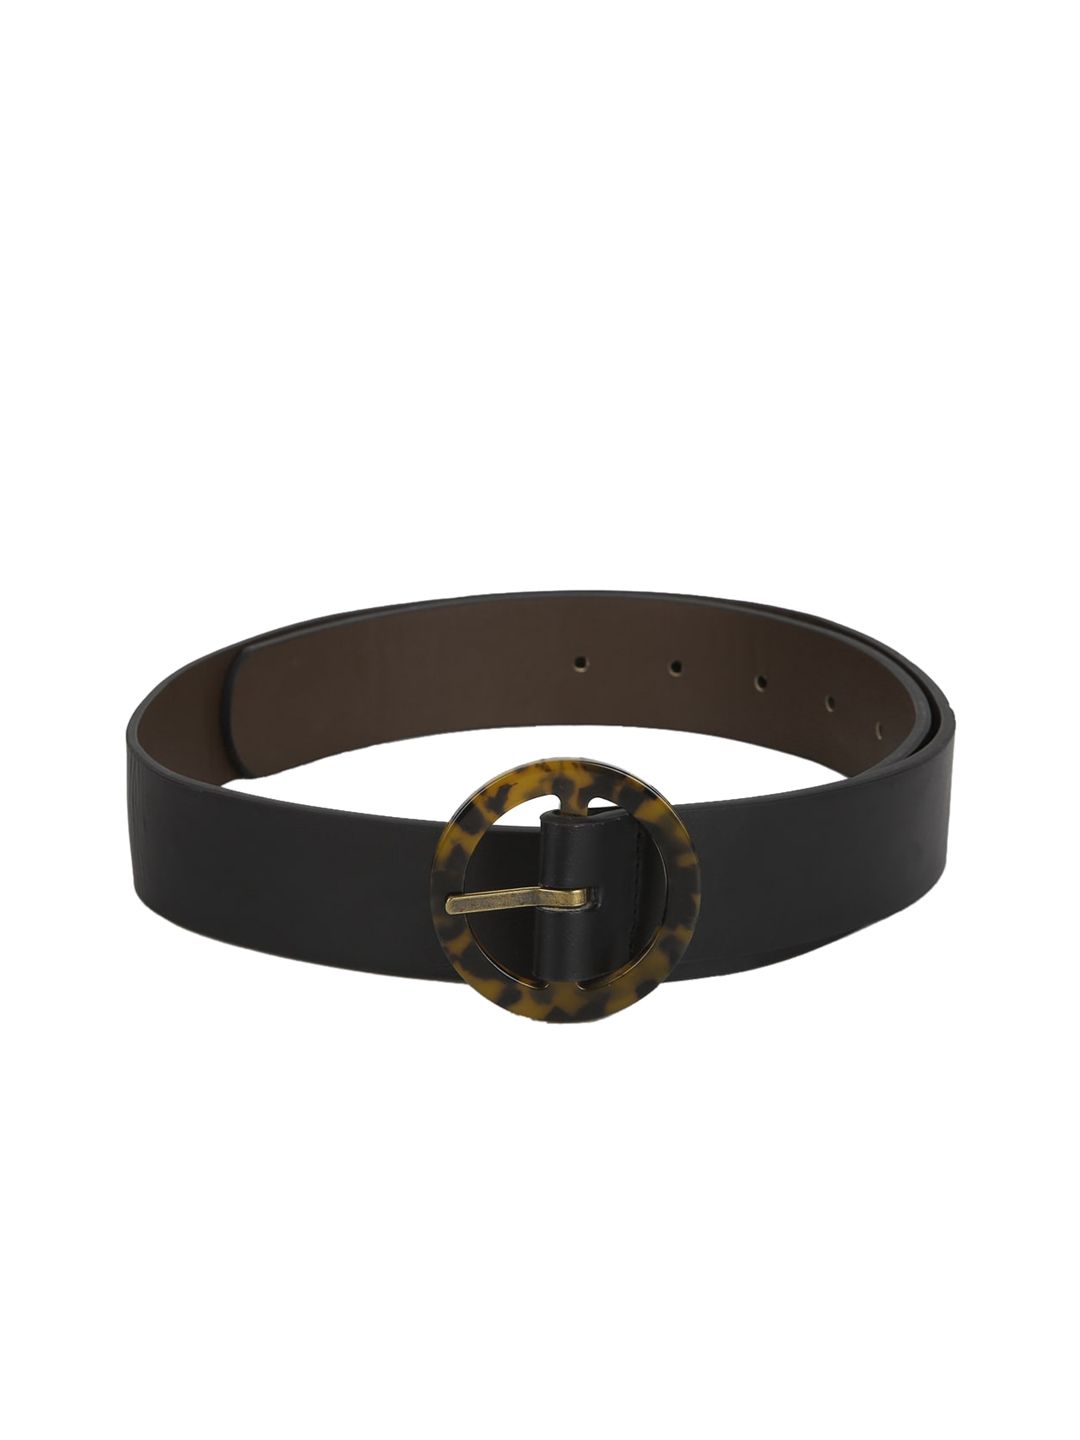 AMERICAN EAGLE OUTFITTERS Women Black Solid Belt Price in India